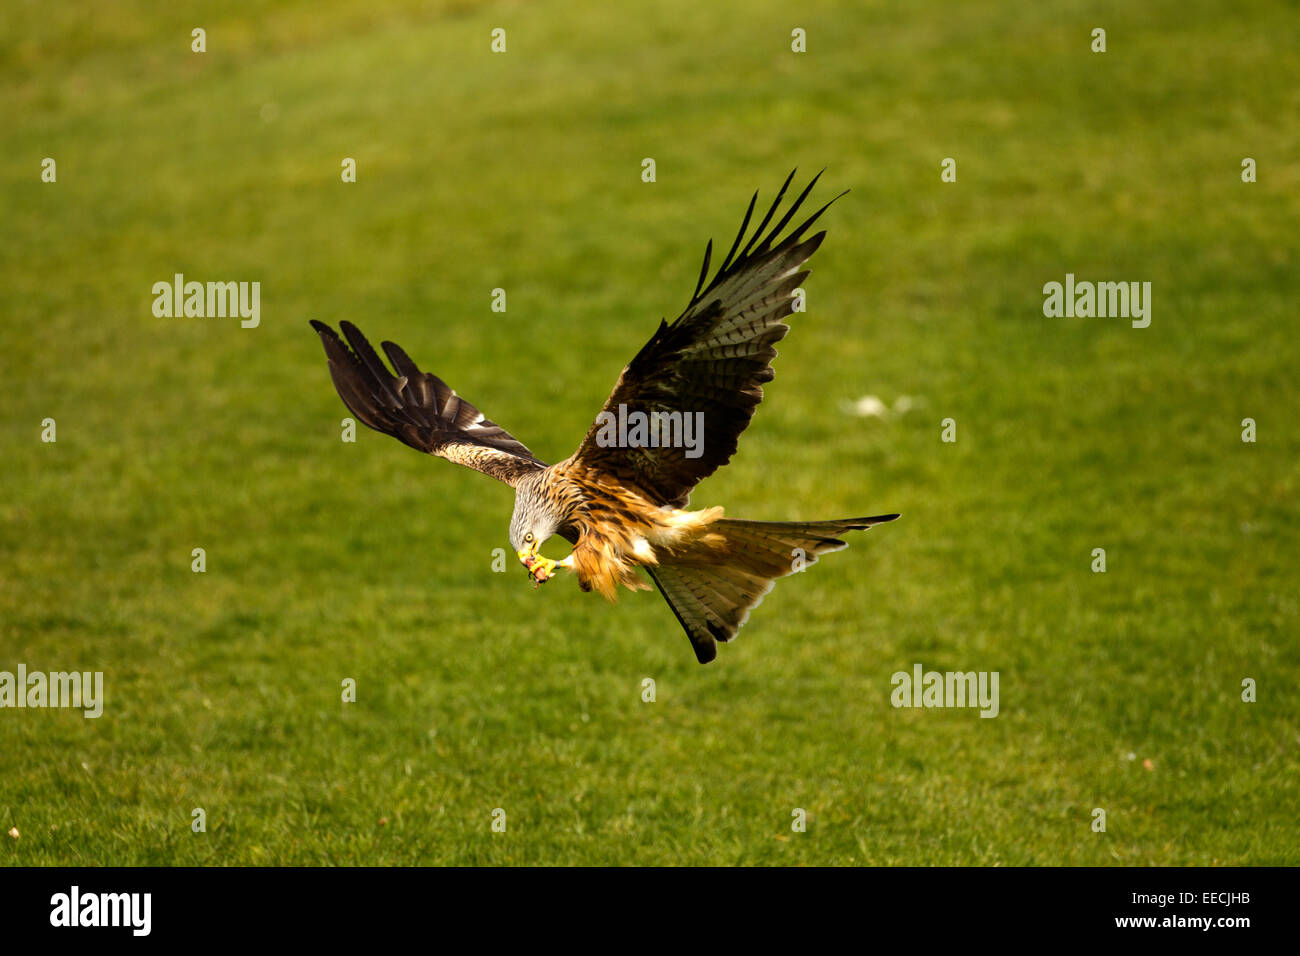 Red Kite feeding in flight Banque D'Images